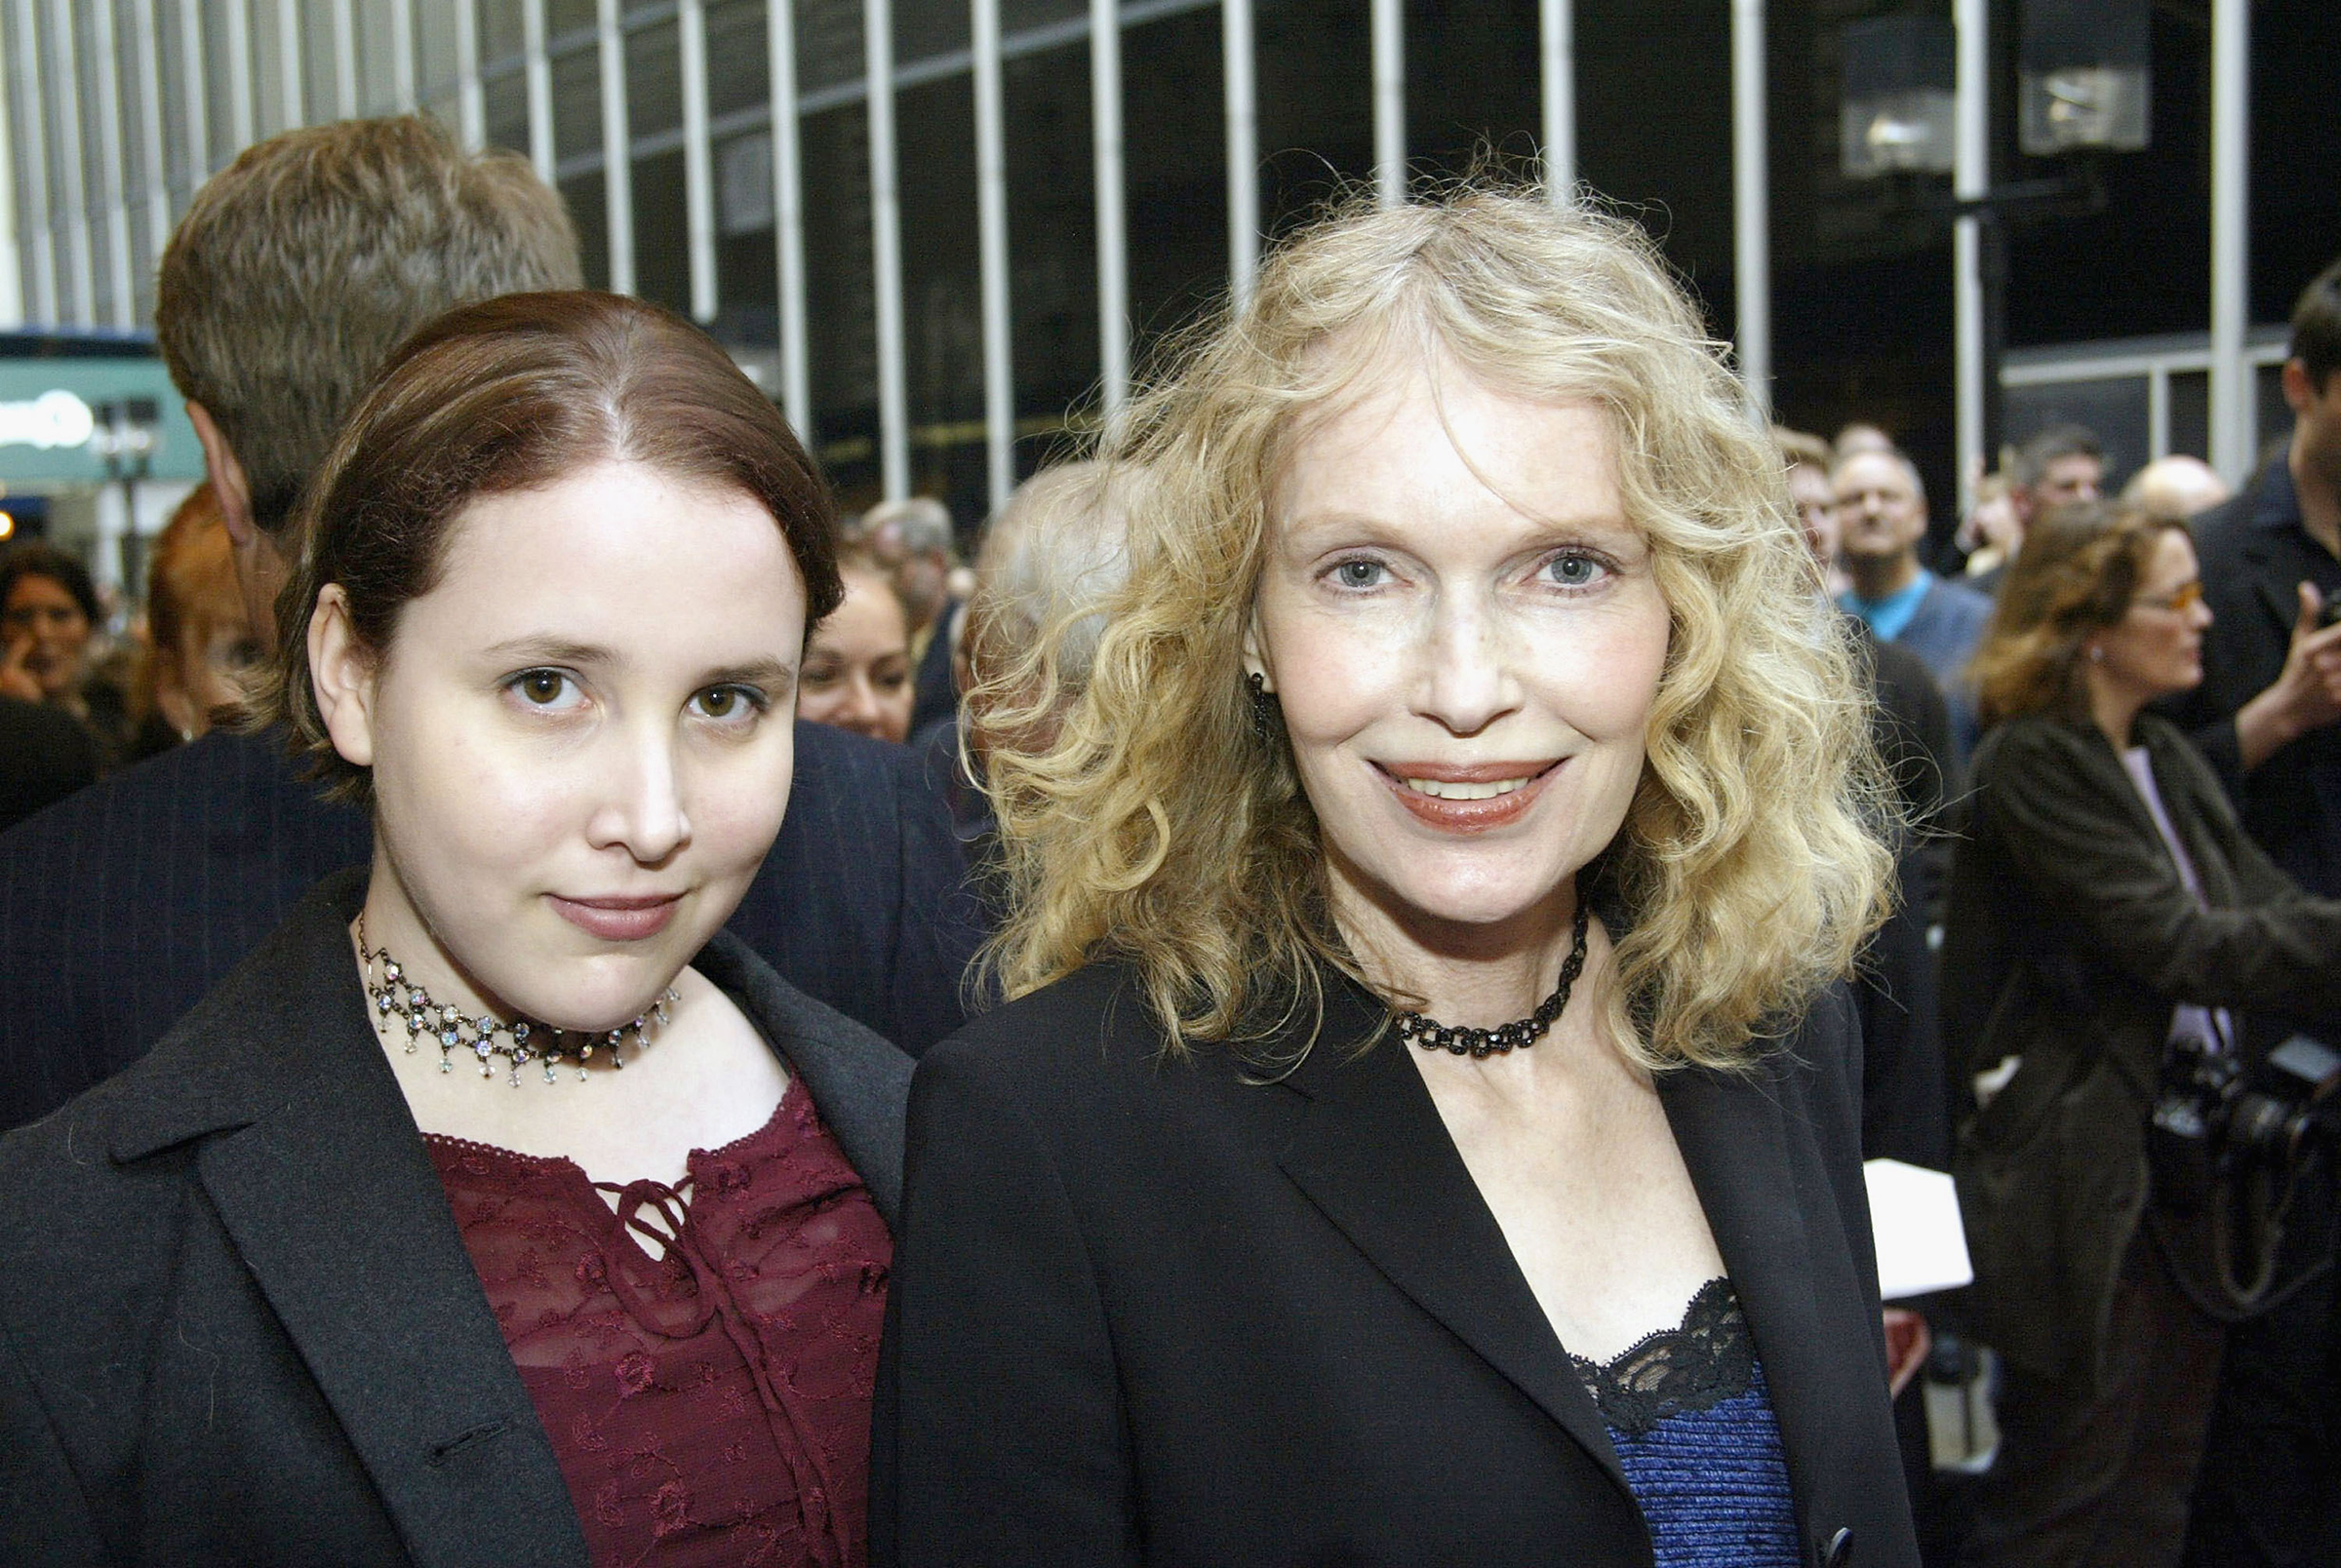 Mia Farrow (R) and Dylan Farrow (L) arrive at the Opening Night of "Gypsy" at The Shubert Theatre on May 1, 2003 in New York City